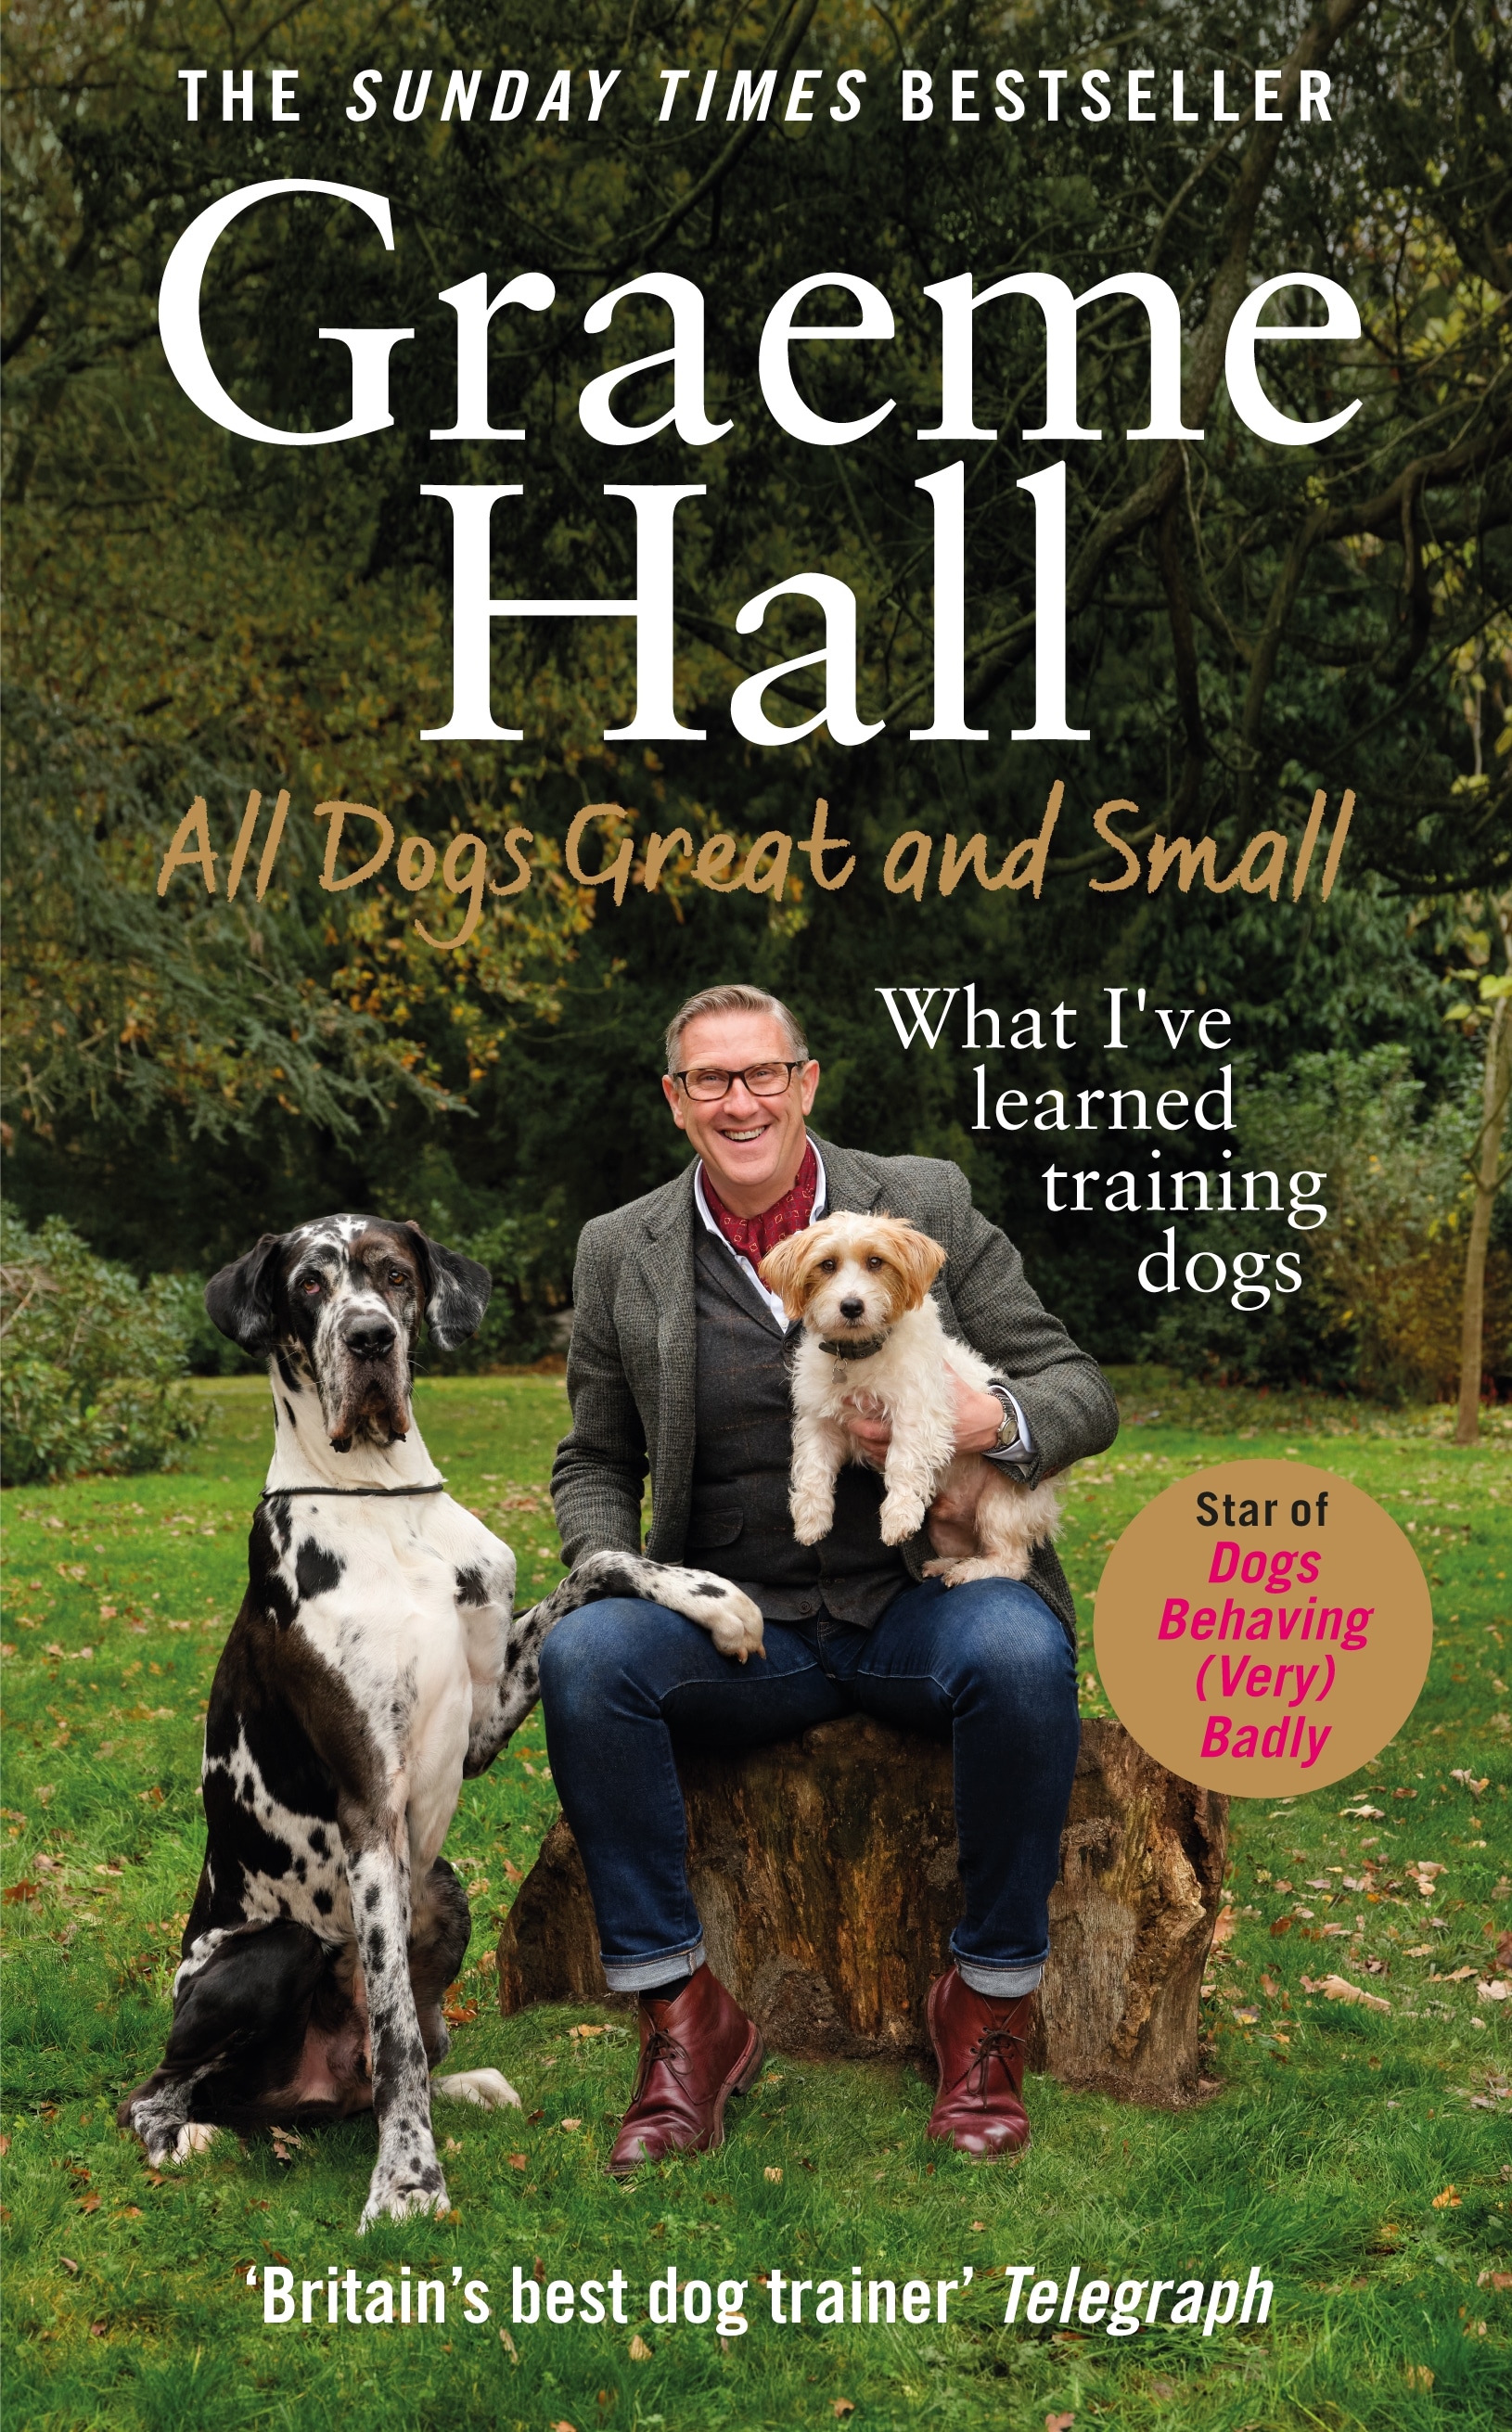 Book “All Dogs Great and Small” by Graeme Hall — February 18, 2021